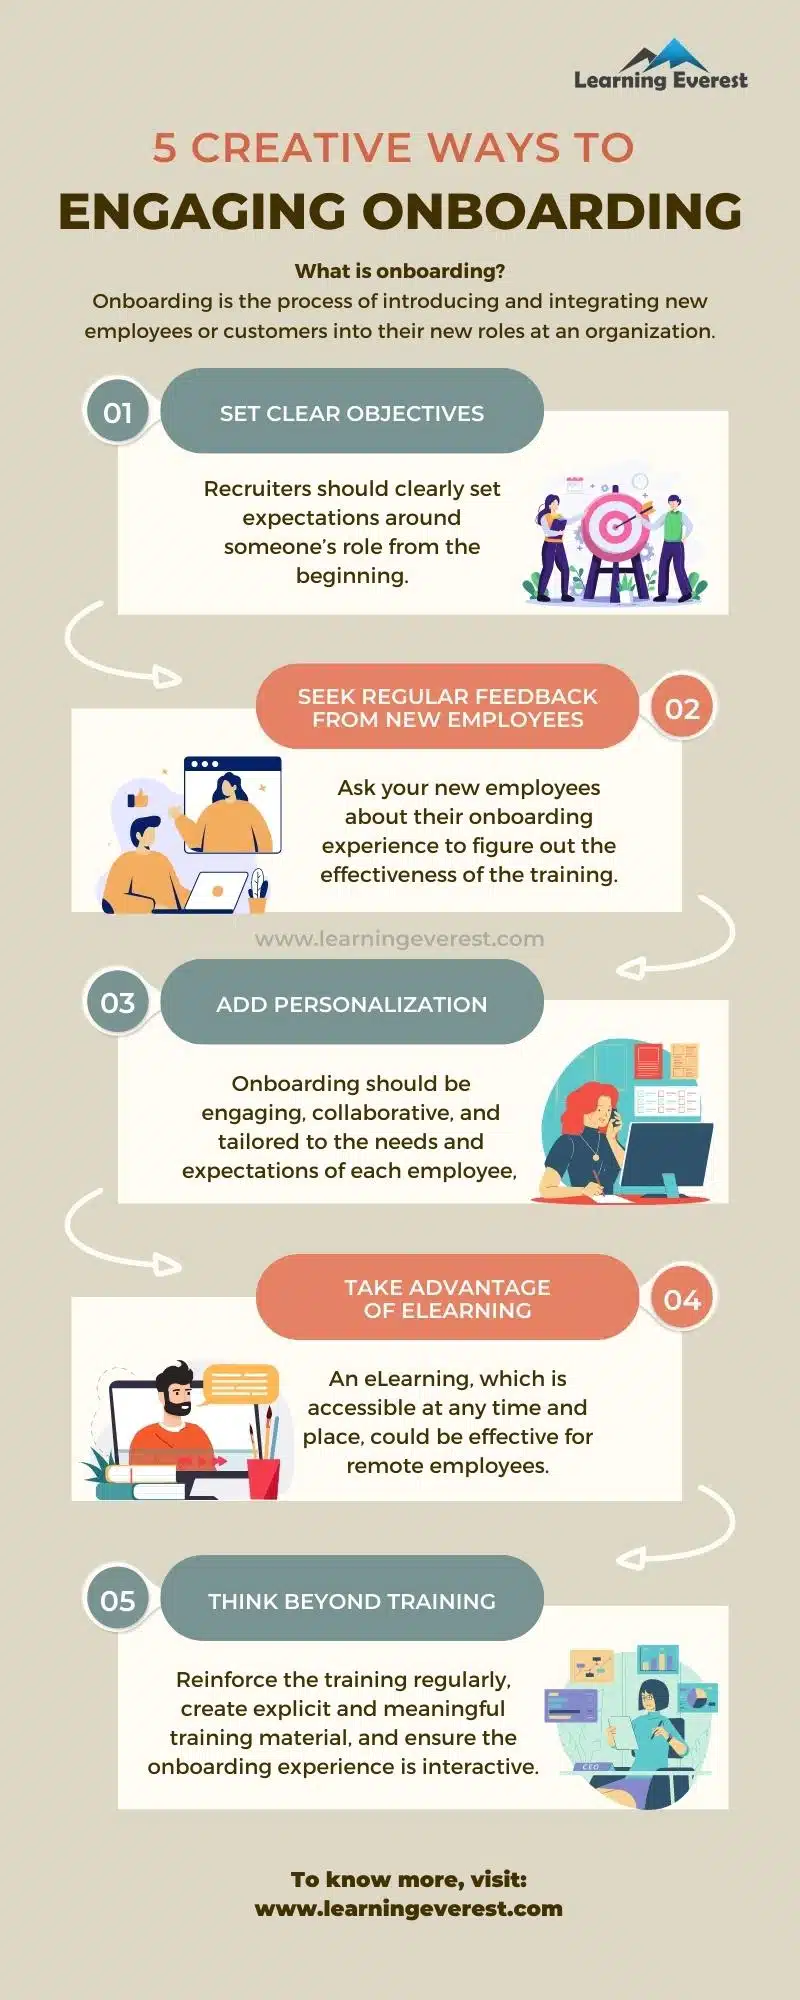 5 Tips For Onboarding Remote Employees